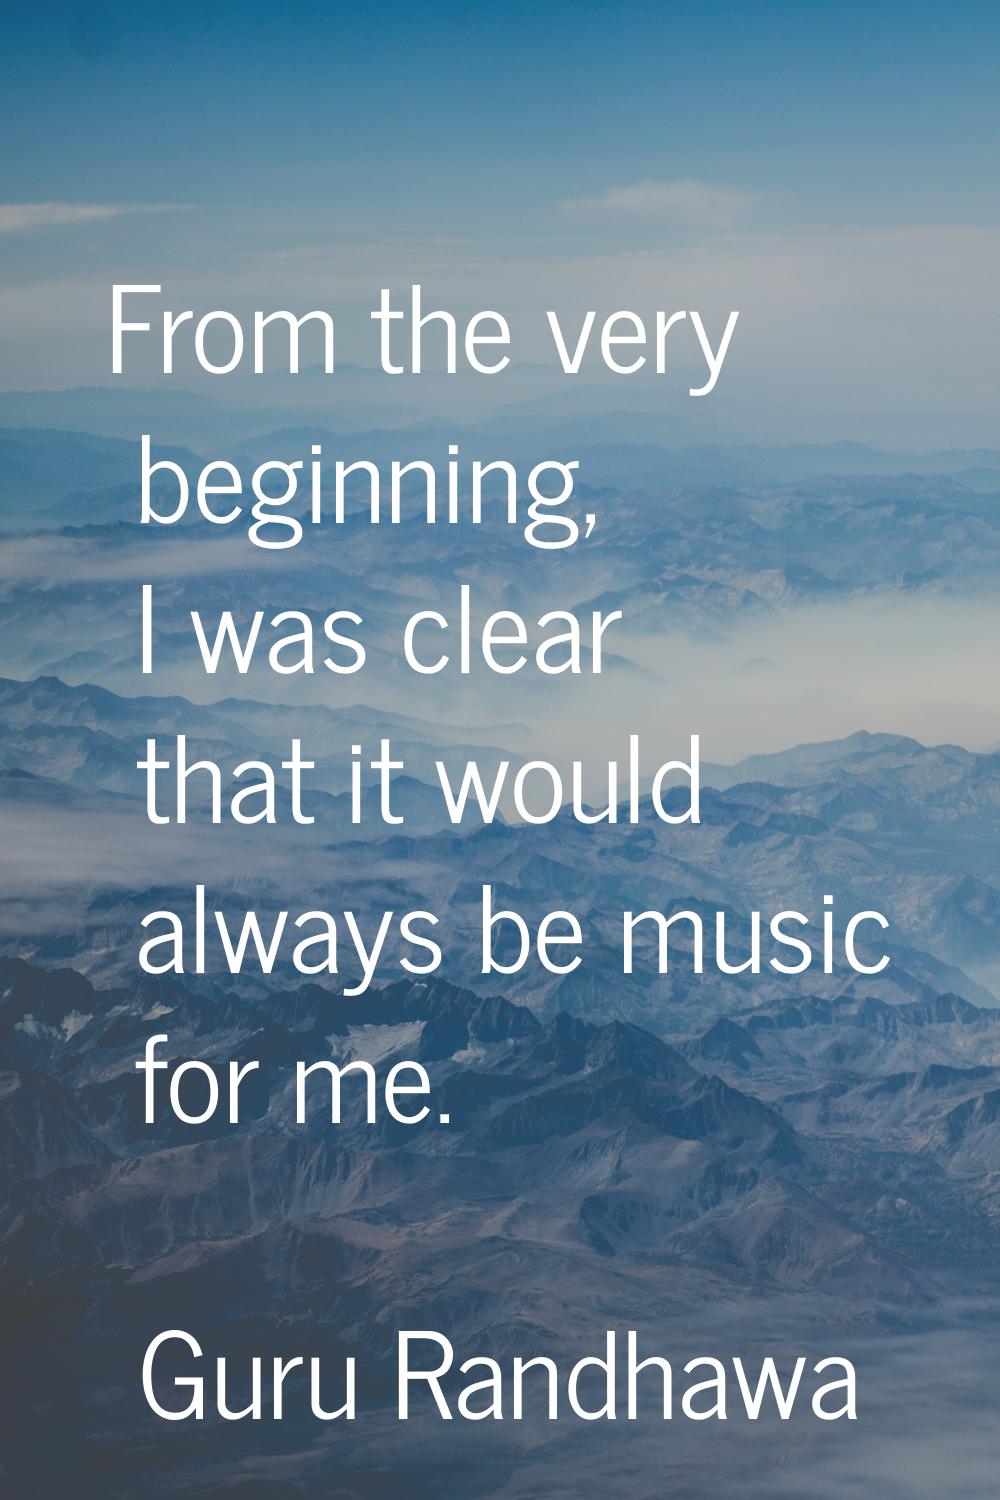 From the very beginning, I was clear that it would always be music for me.